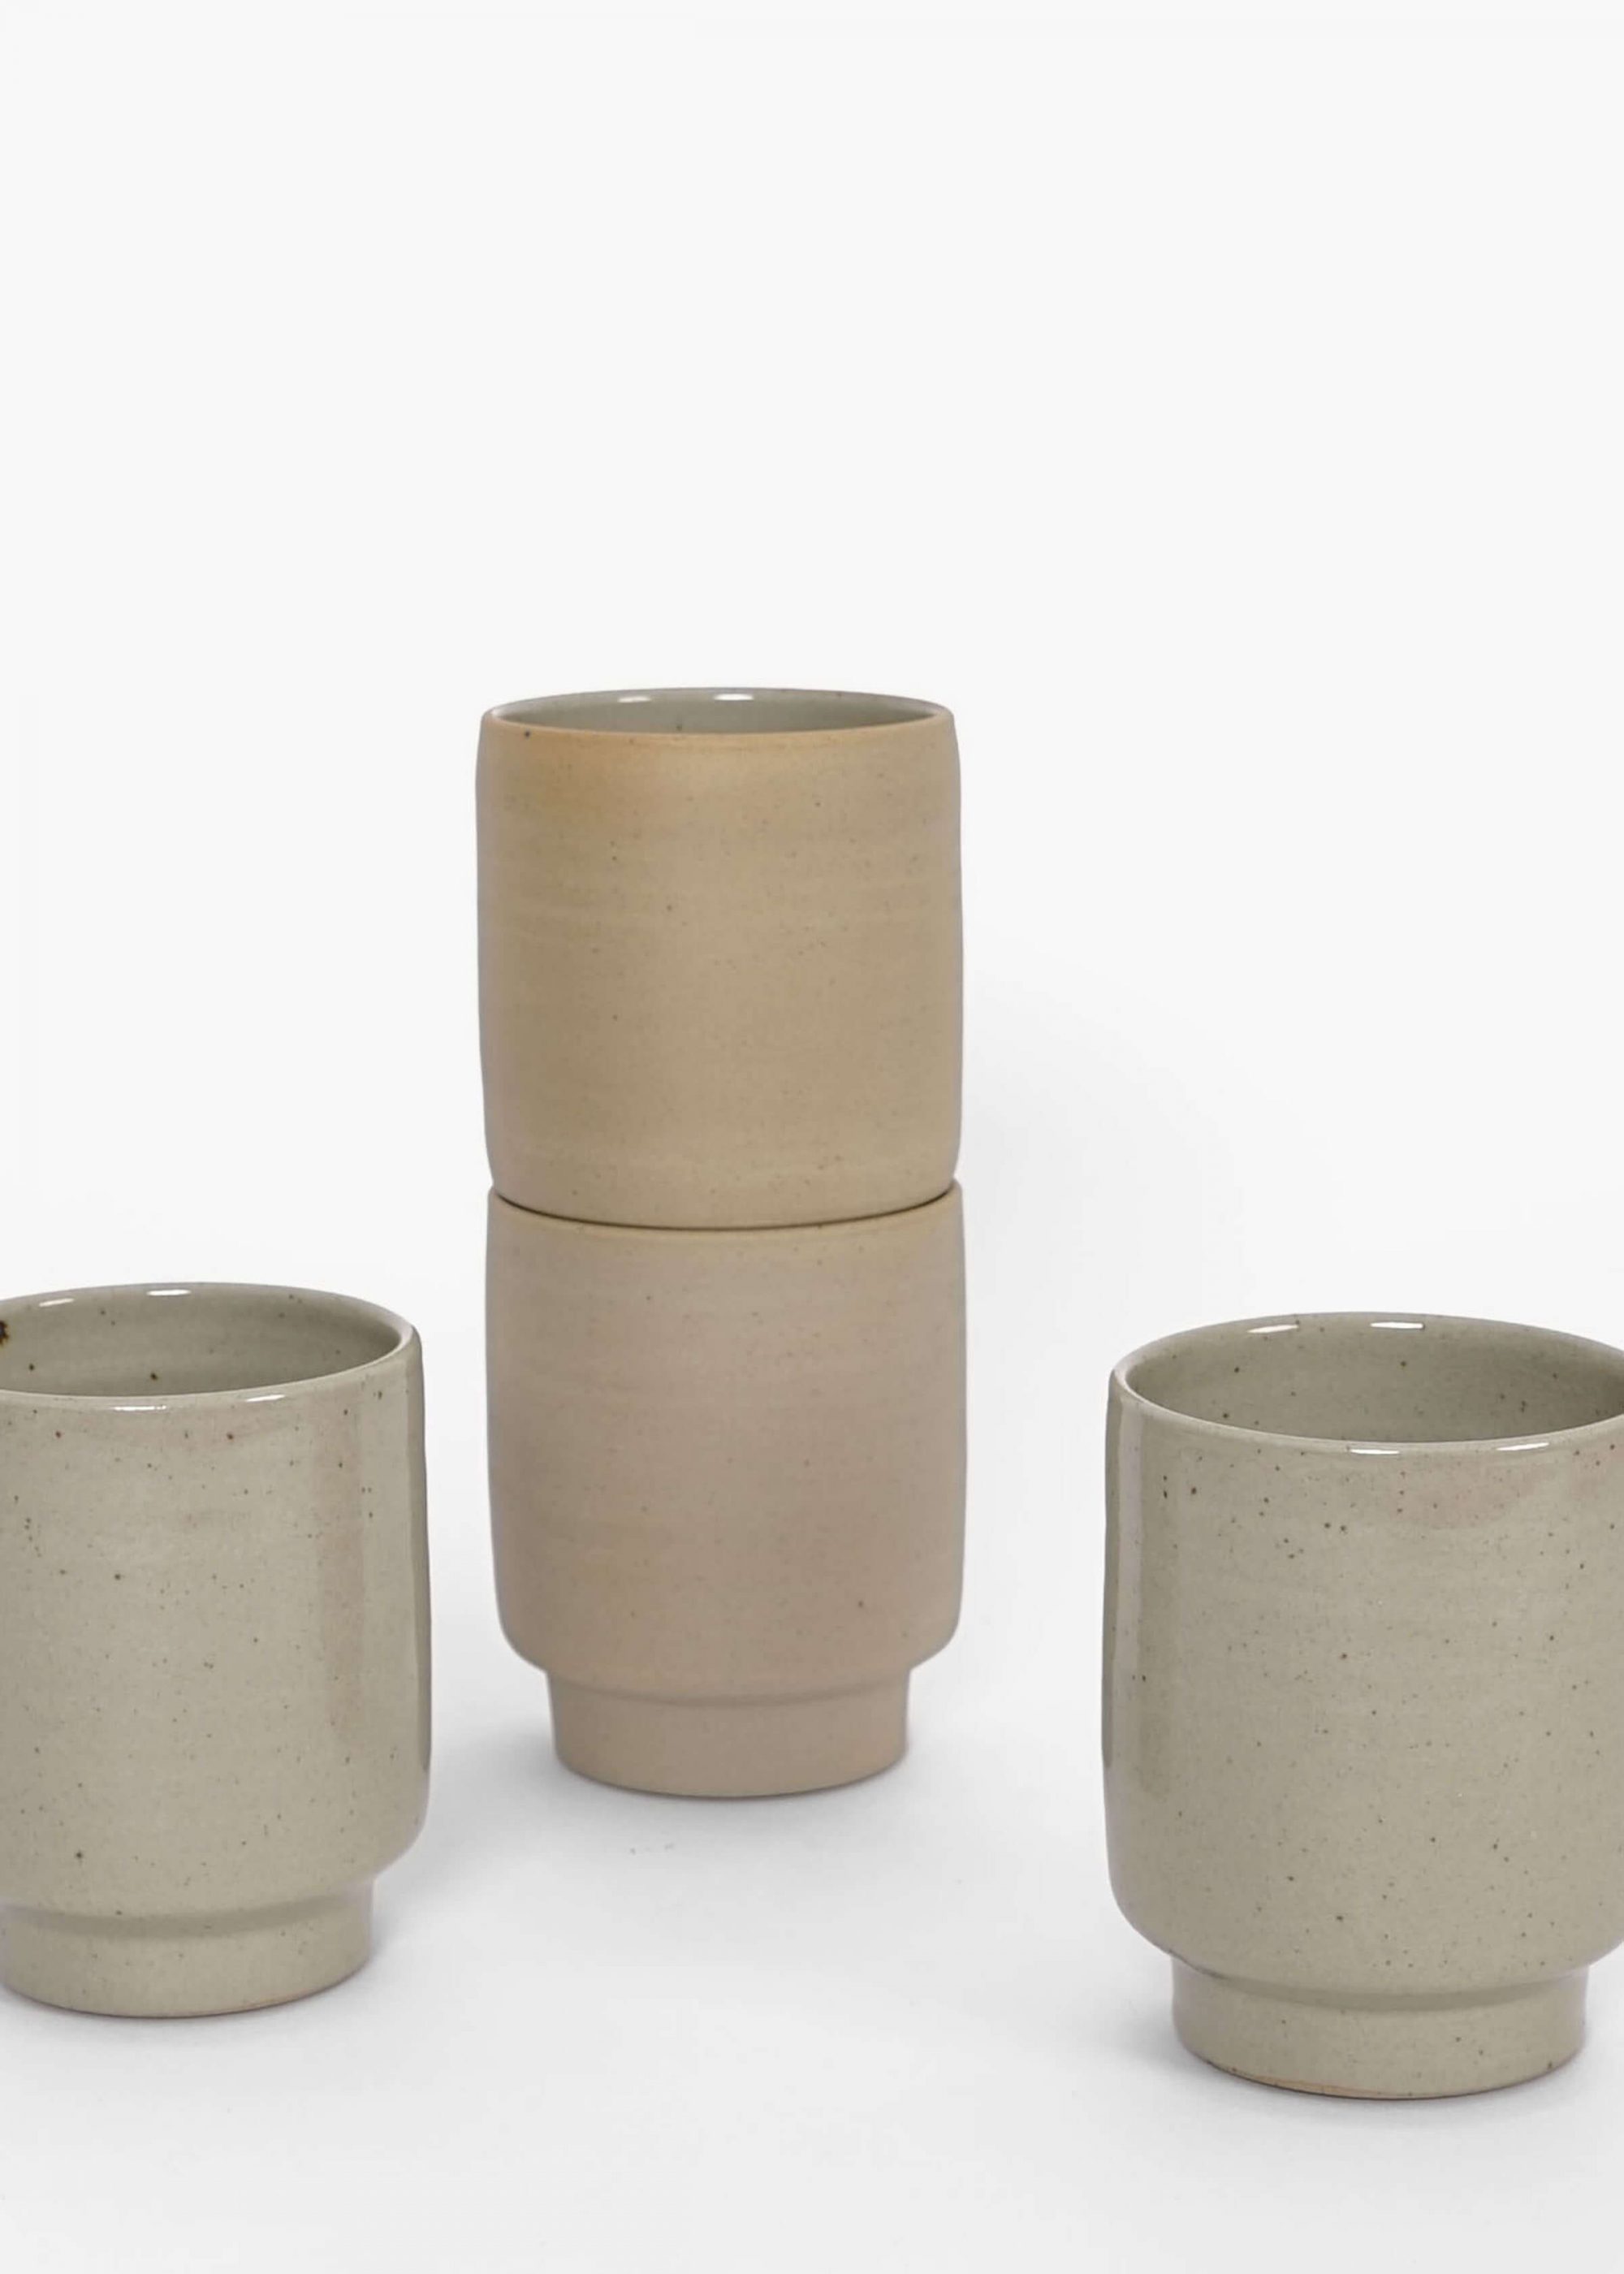 Product image for N° ICSA1 BEUYS Cup Semi-Glazed